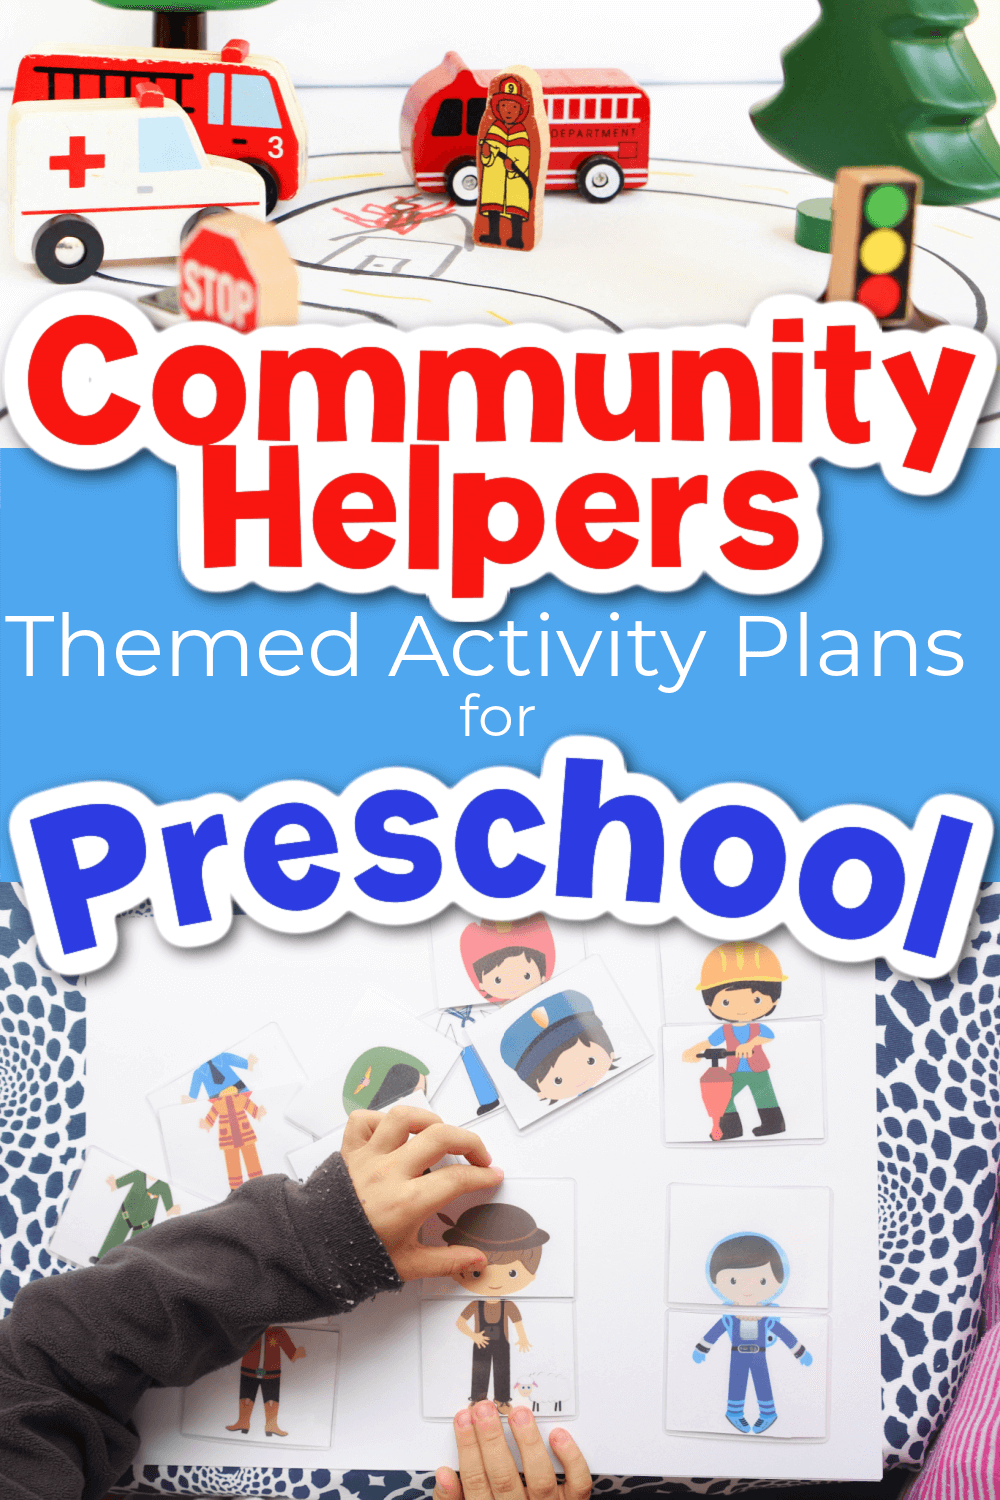 Preschool community helpers lesson plans complete with crafts, books, and activities.